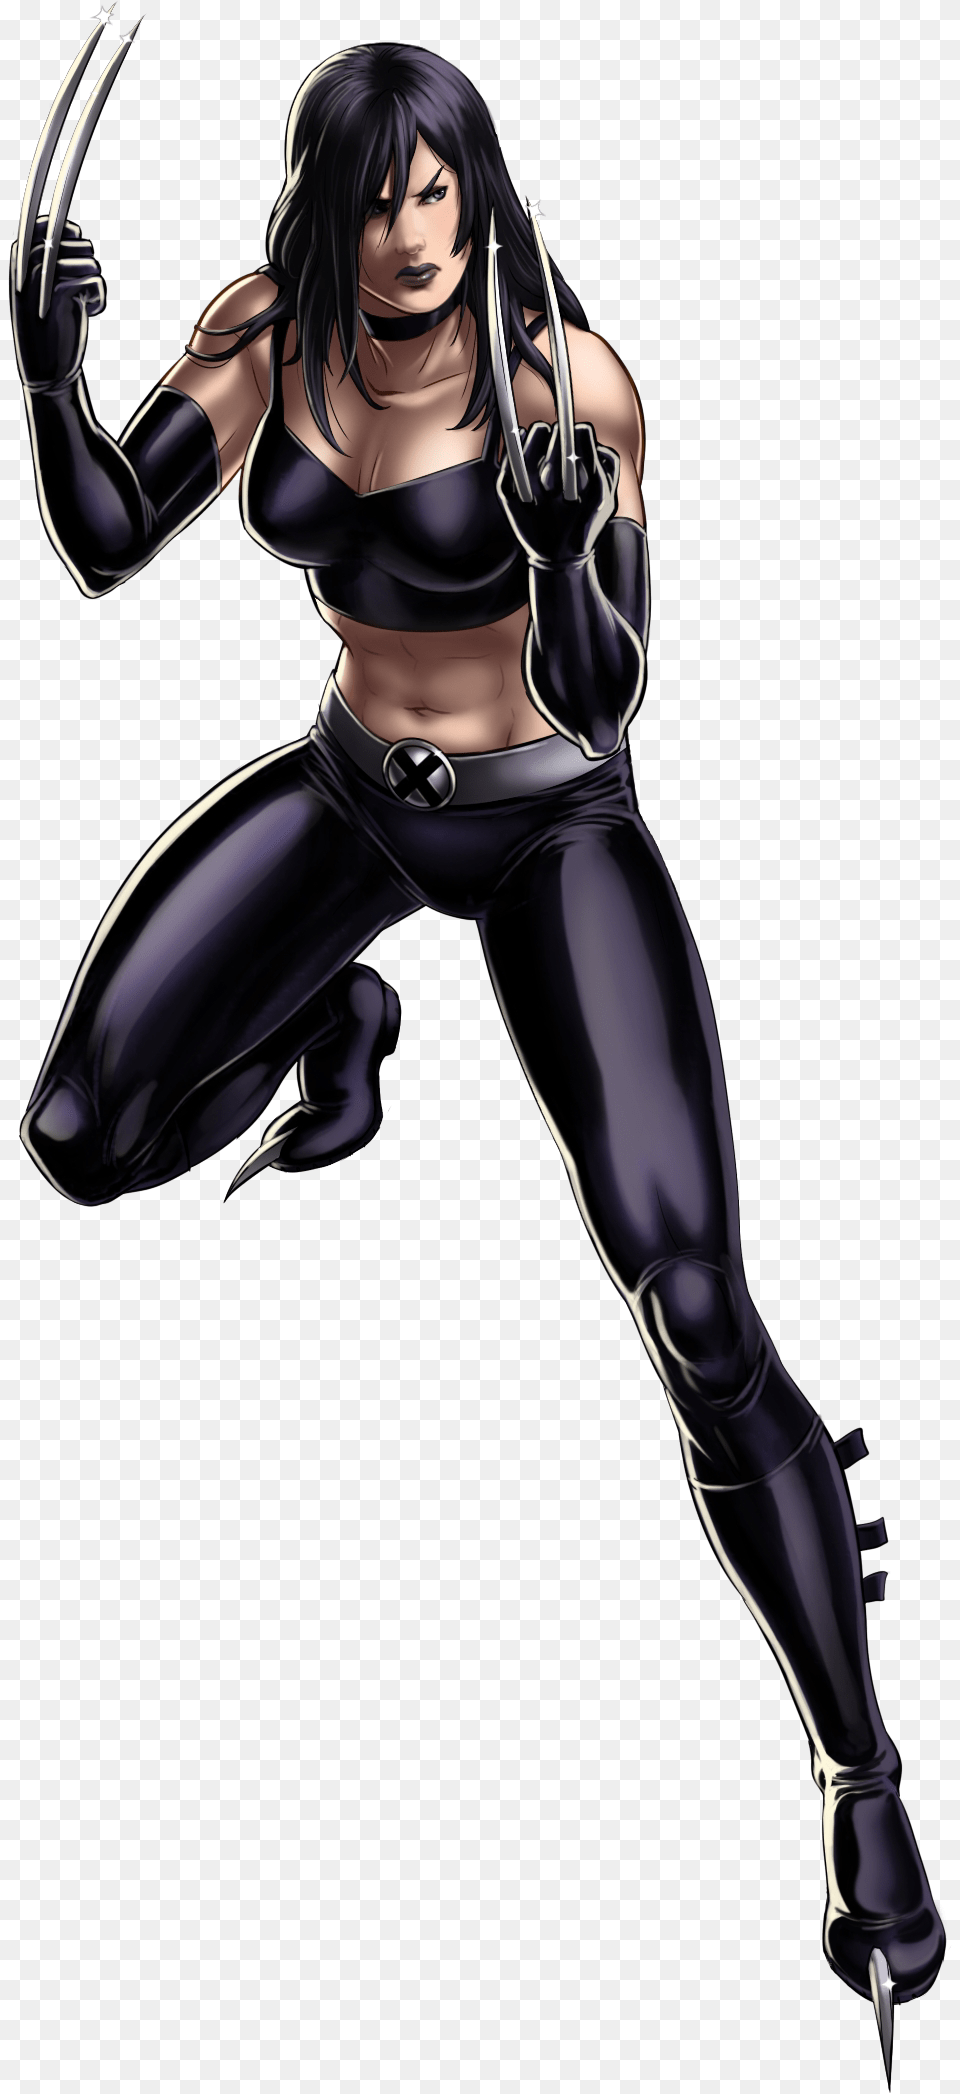 X 23 X23 Marvel Avengers Alliance, Adult, Female, Person, Woman Png Image